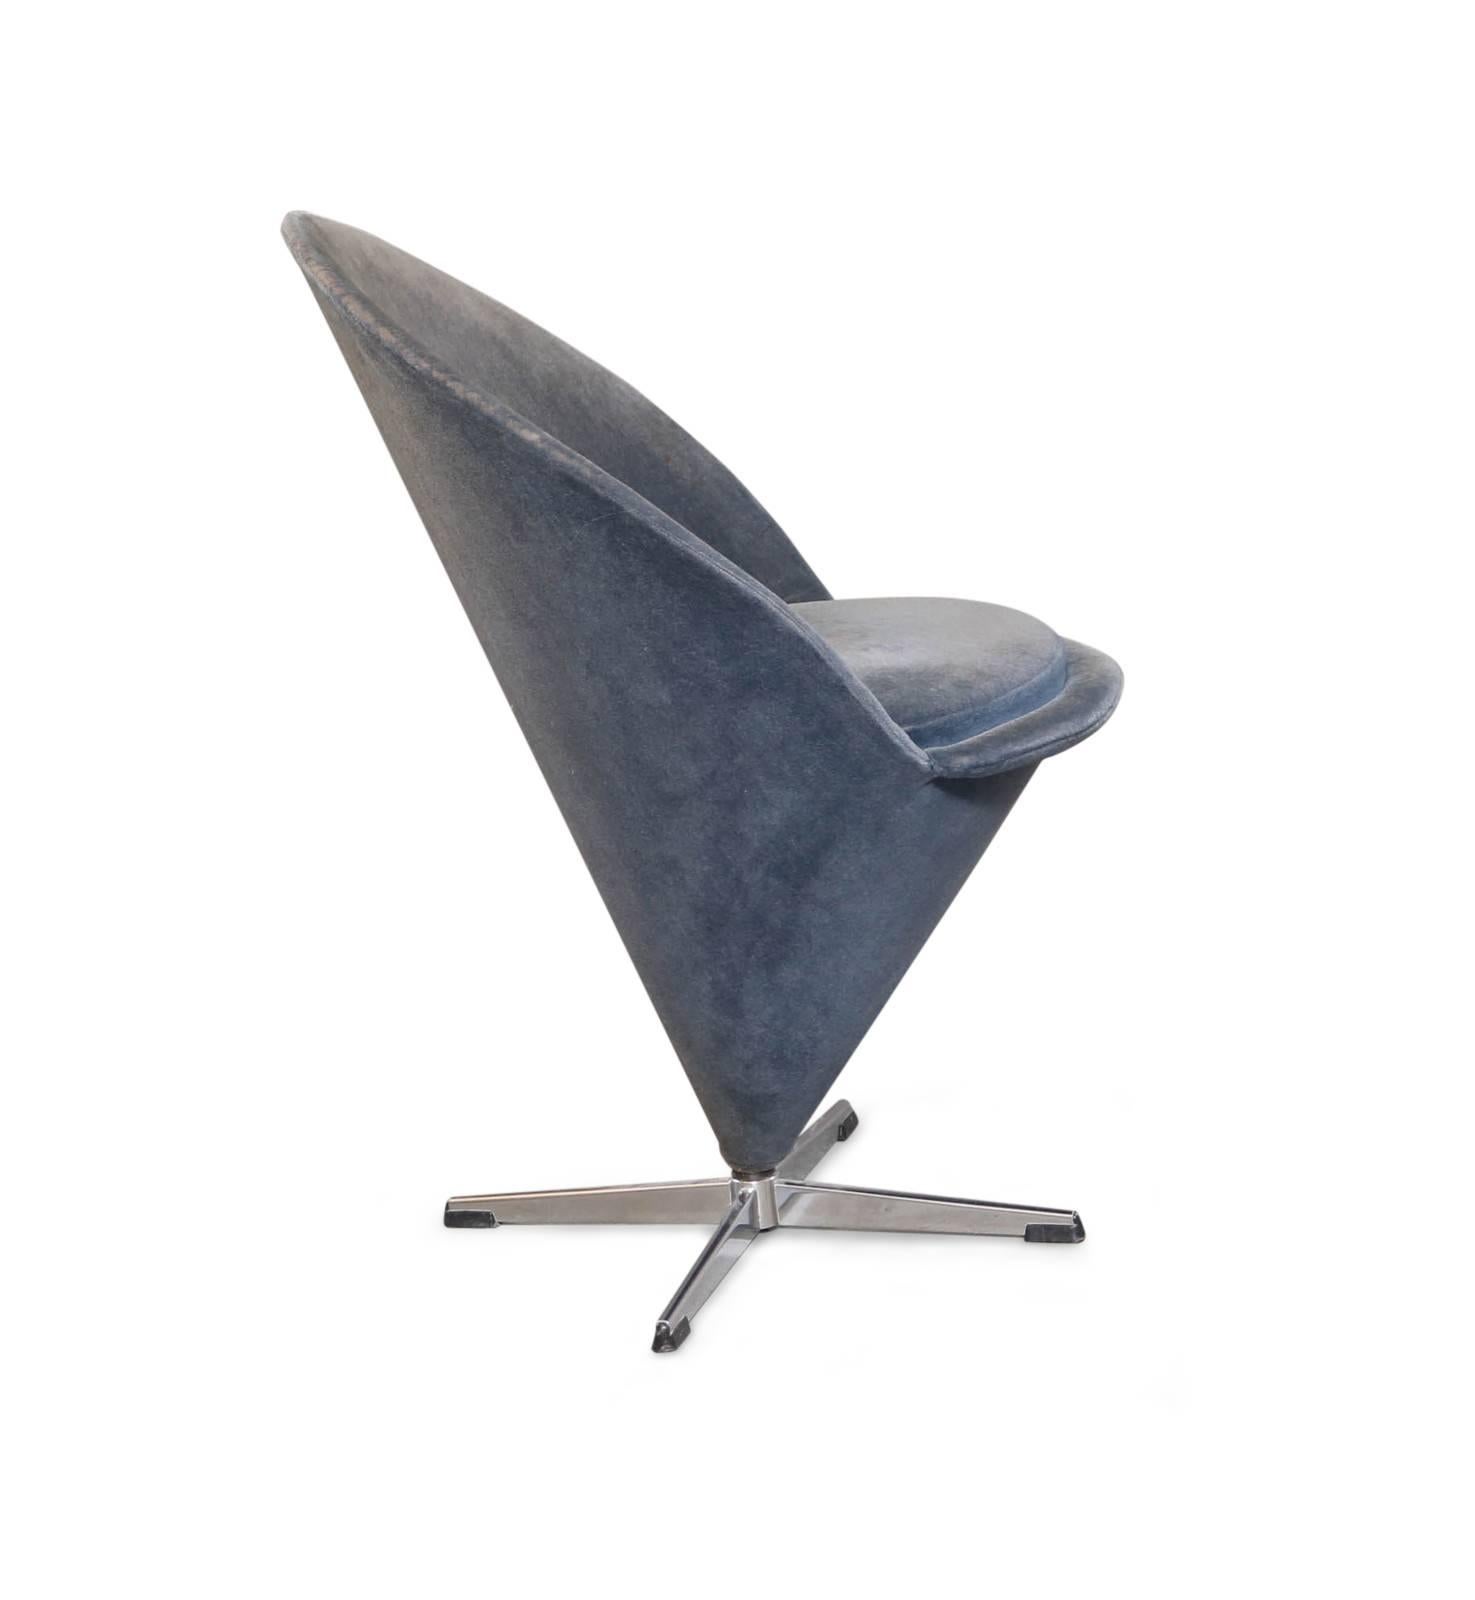 Chair, model Cone chair, covered with grey velvet. Krummerhusform, mounted on a four-legged foot. Verner Panton. Wear marks and worn areas on the fabric.
Measure: H 84 x W 58 x D 60cm.